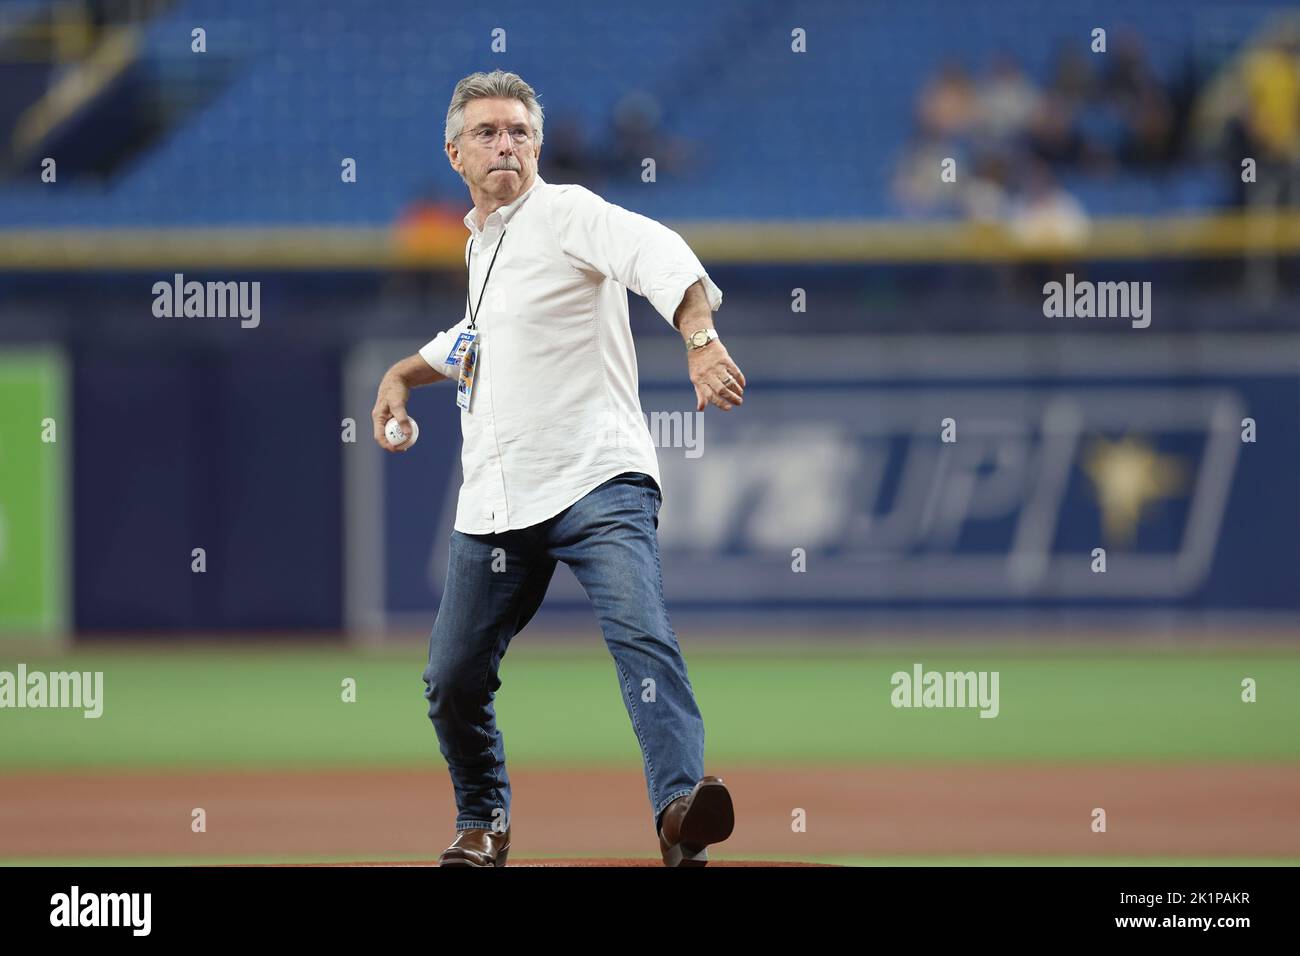 St. Petersburg, FL. USA;  Tampa Bay sports broadcaster Dewayne Staats threw out the ceremonial first pitch to celebrate his 7,000 game prior to a majo Stock Photo